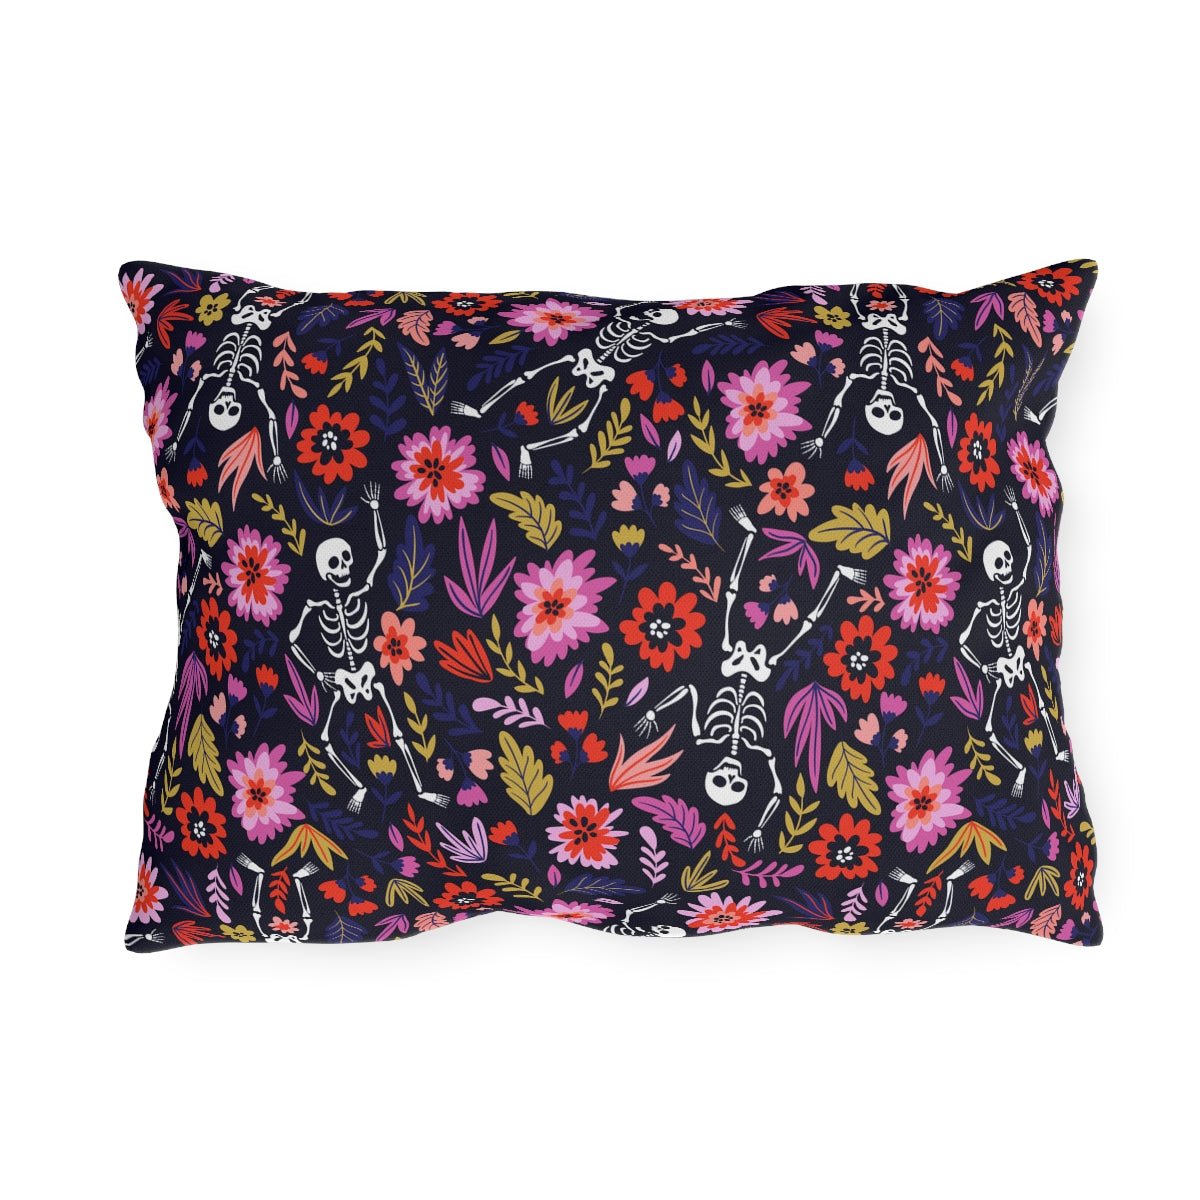 Dancing Skeletons Outdoor Pillow - Puffin Lime